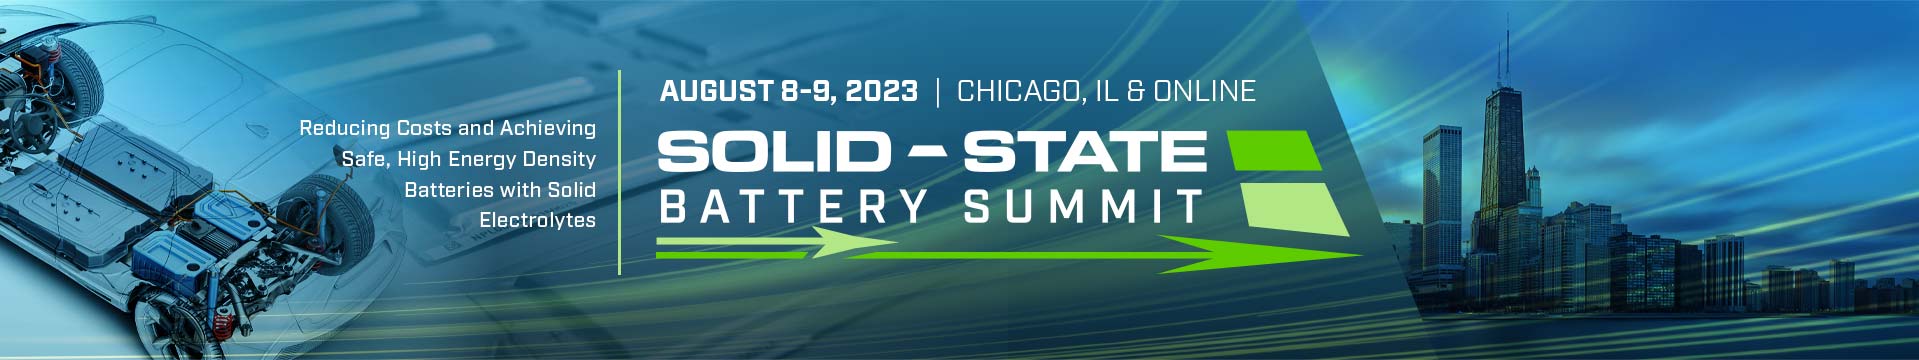 Solid-State Batteries Summit Banner